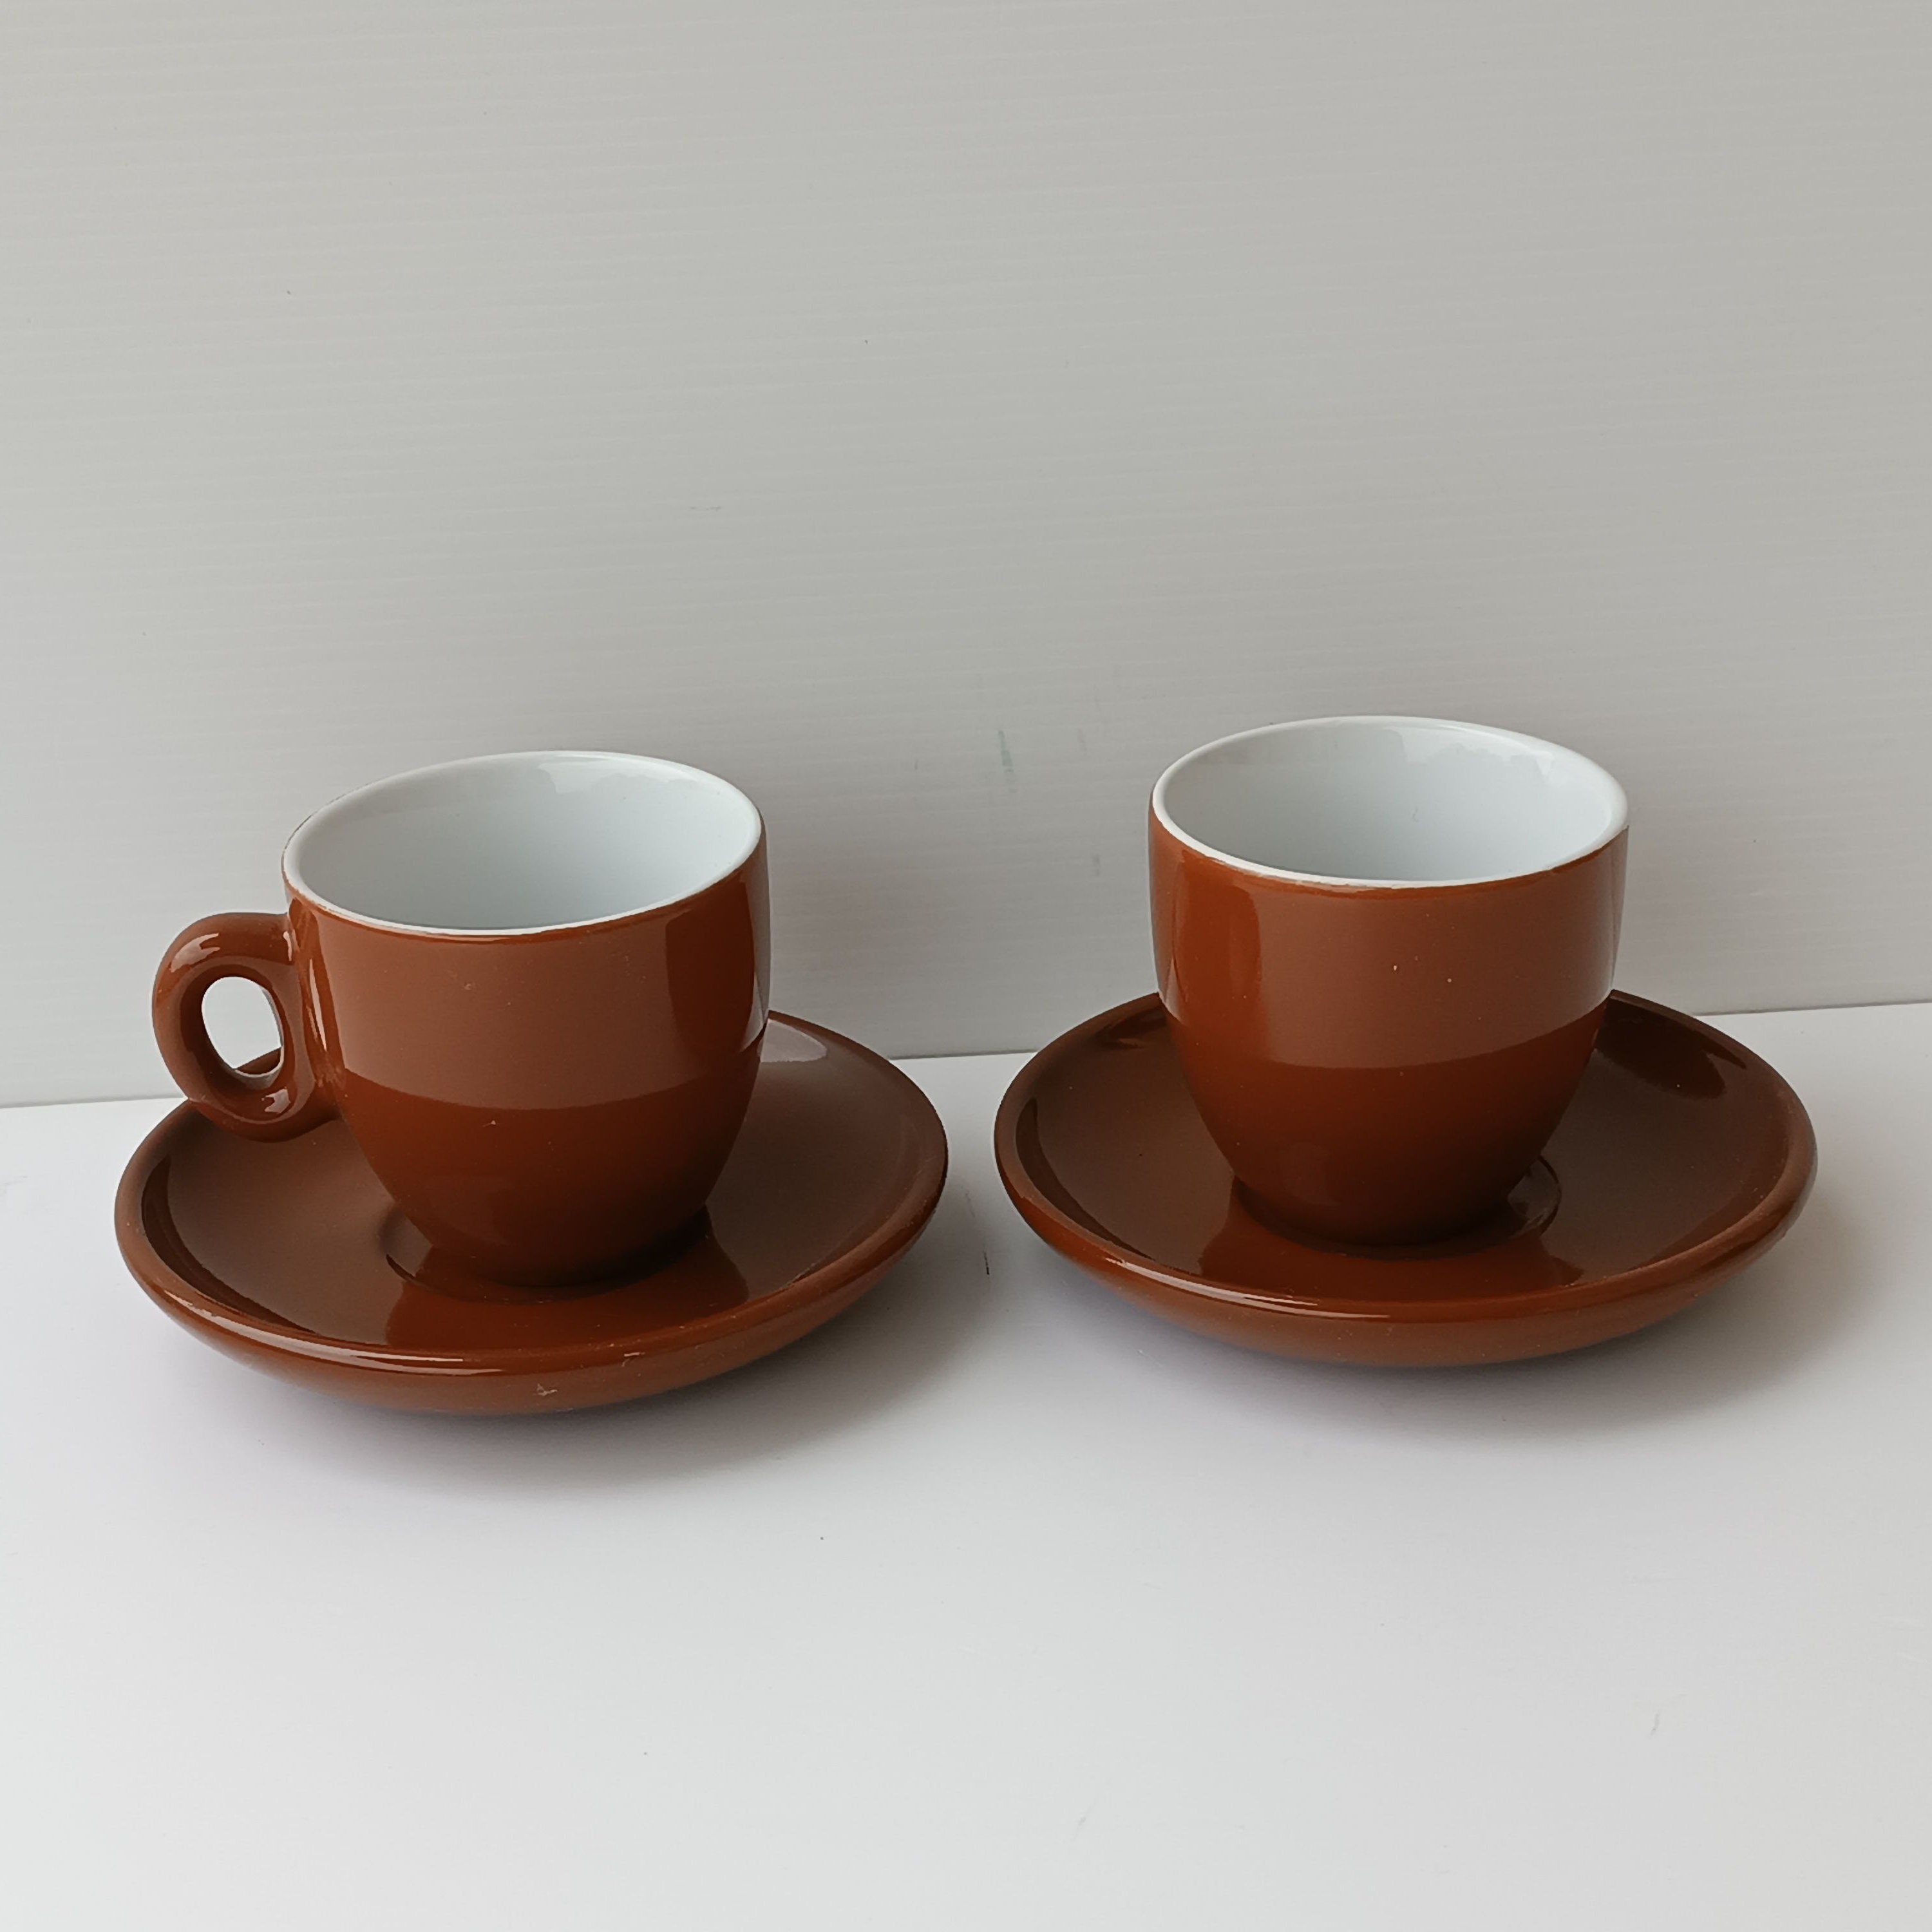 White Cappuccino Cups by Nuova Point, Made In Italy - Espresso Machine  Experts